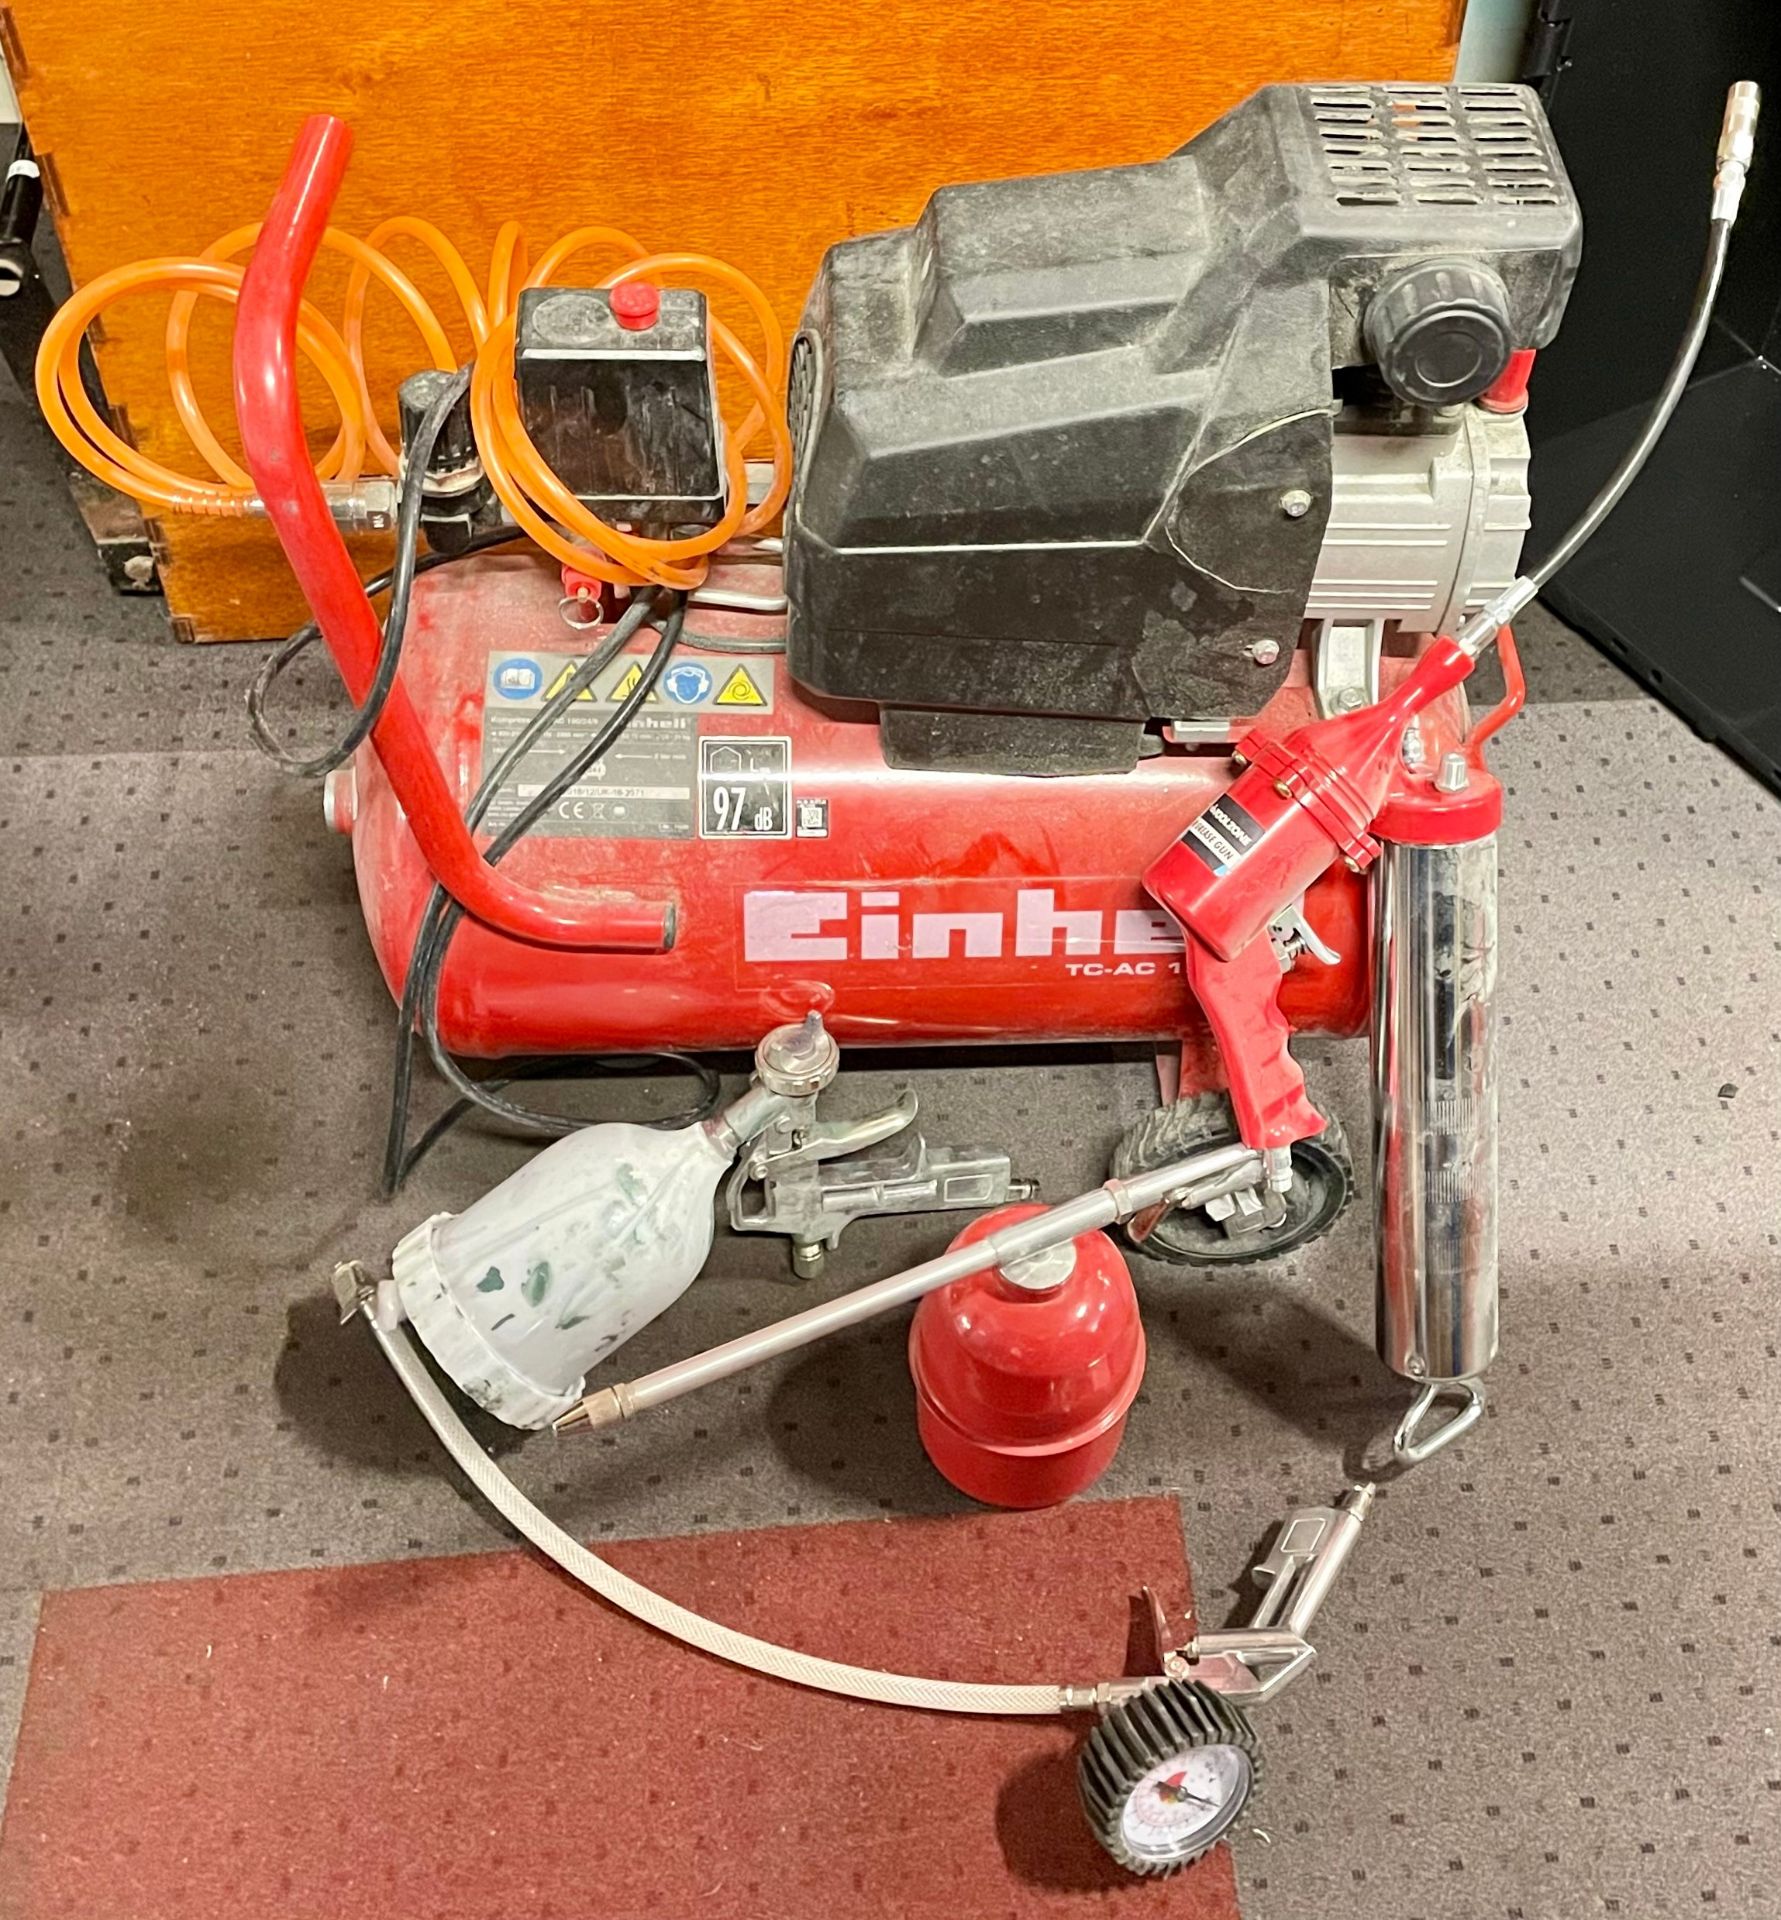 A Einhell 240 volt compressor, with associated airlines, grease gun and paint gun.